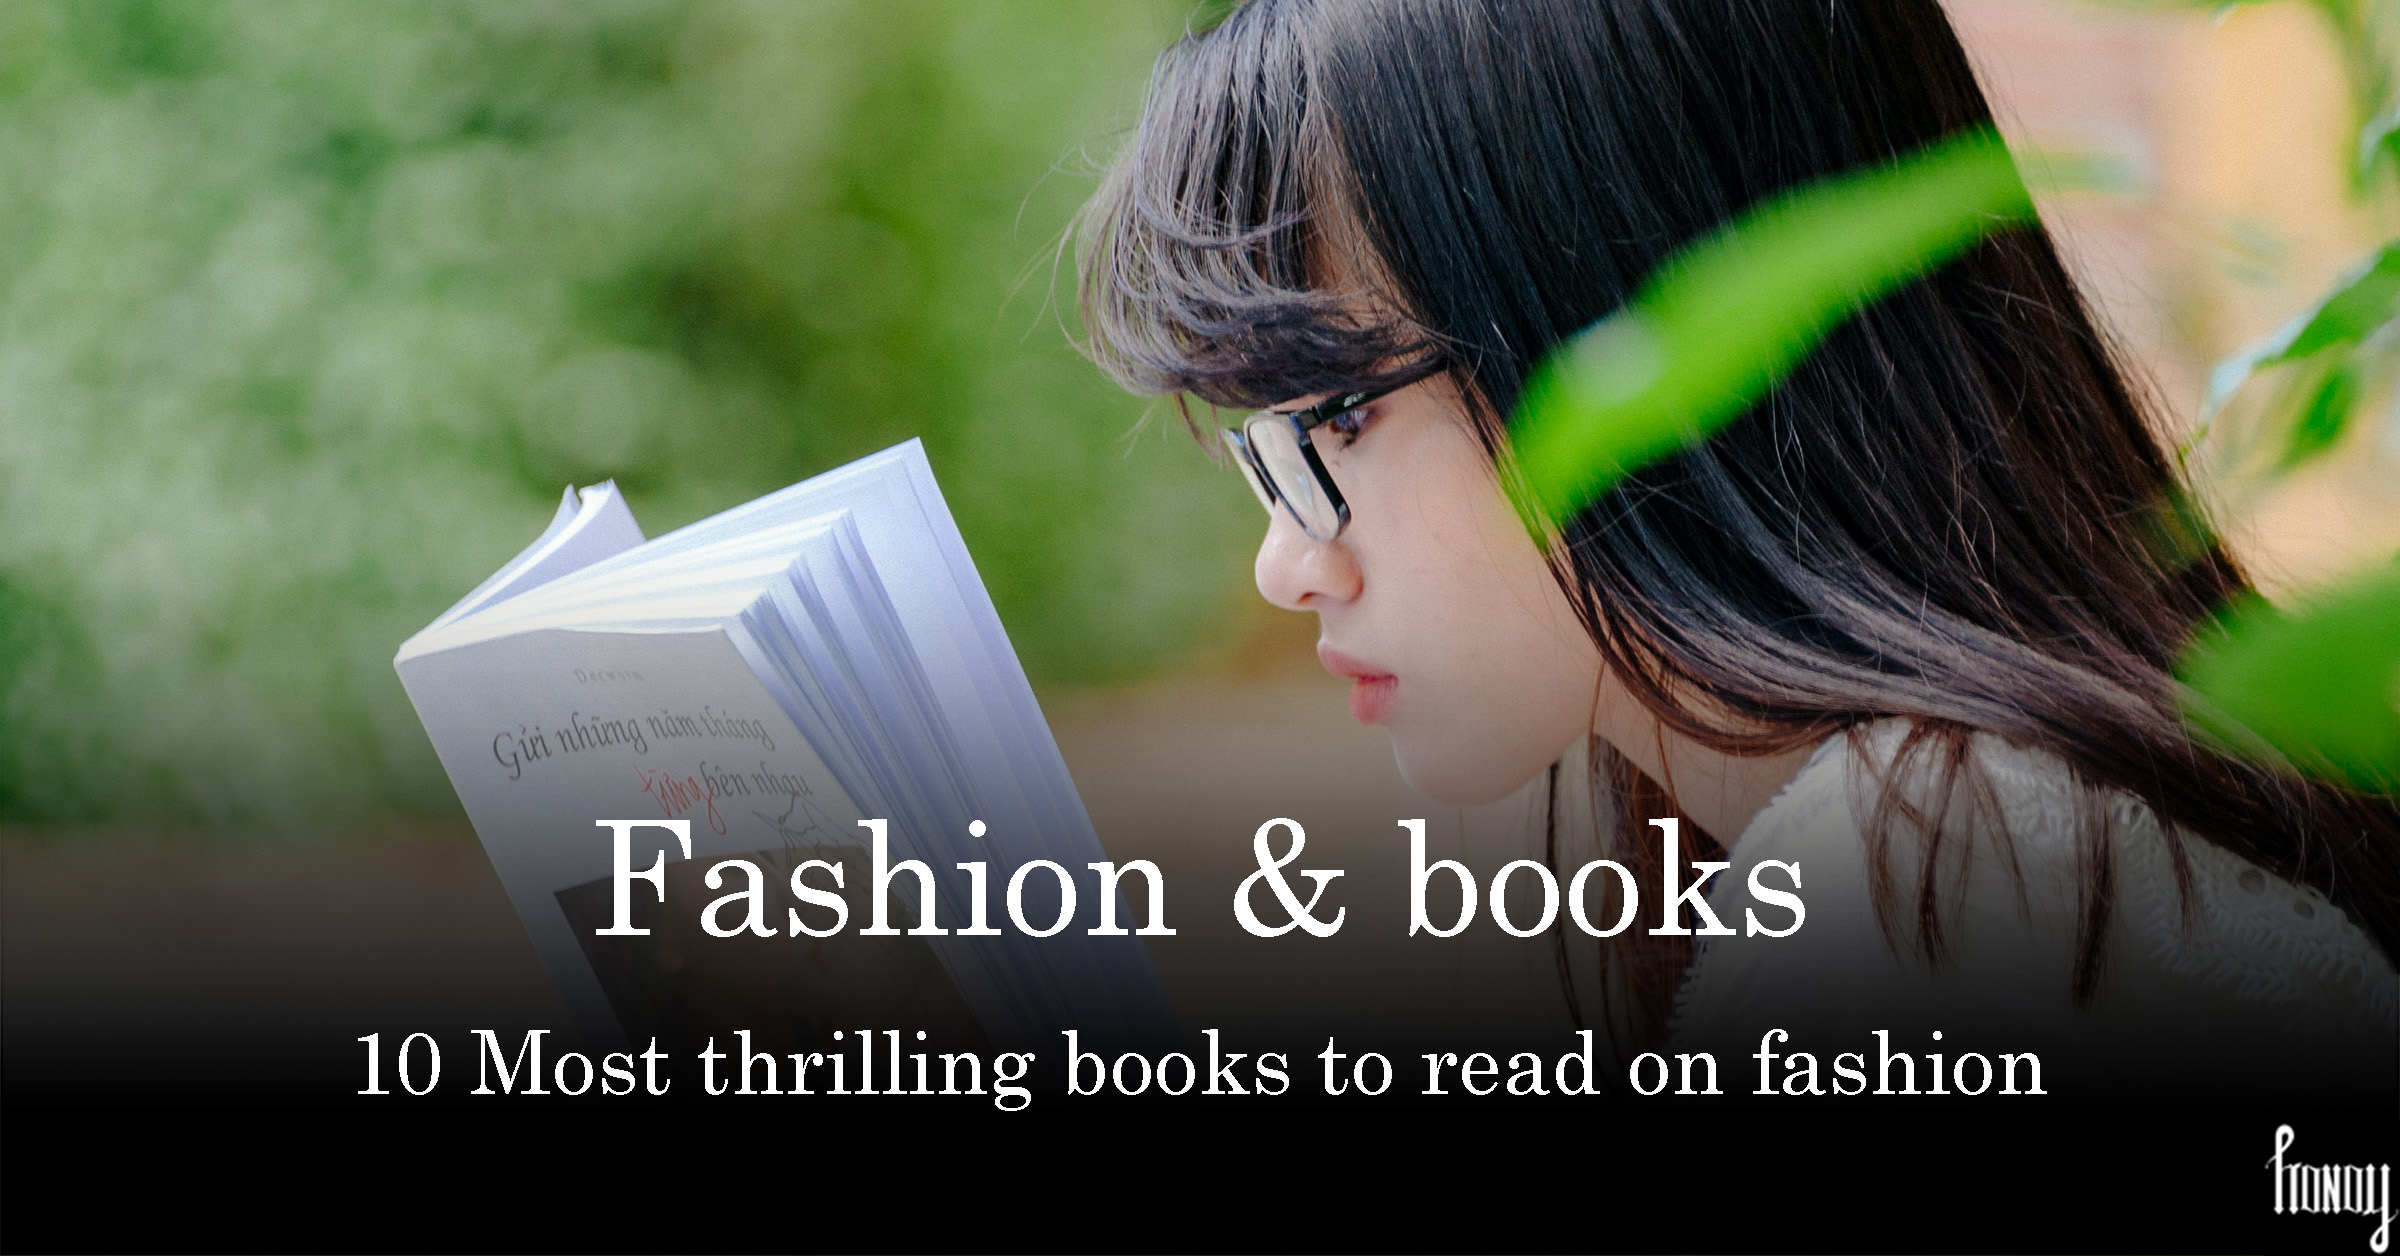 10 Most thrilling books to read on fashion